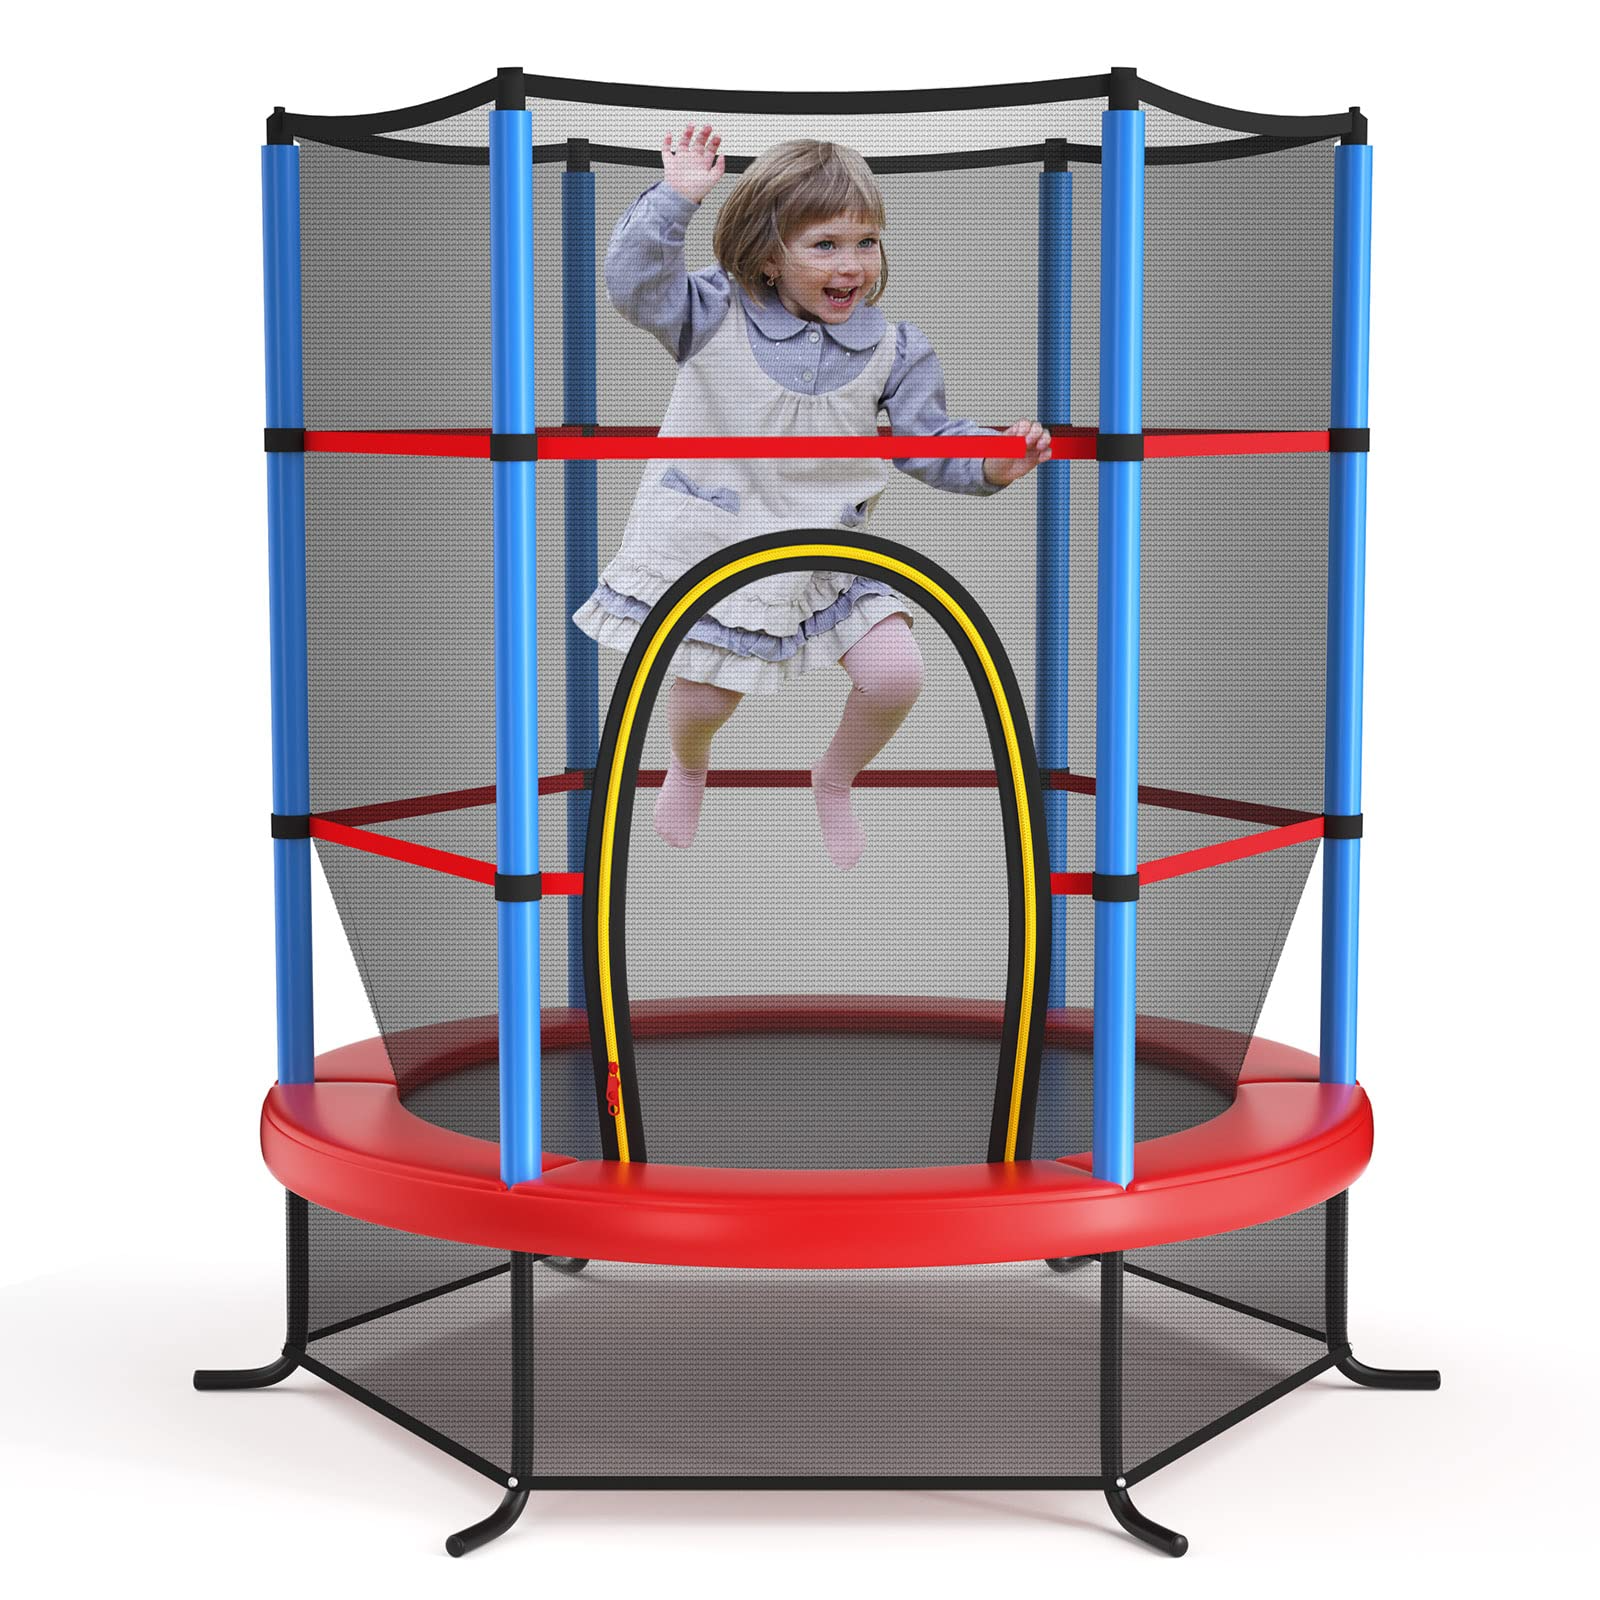 55" Kids Trampoline with Safety Enclosure Net - Giantex